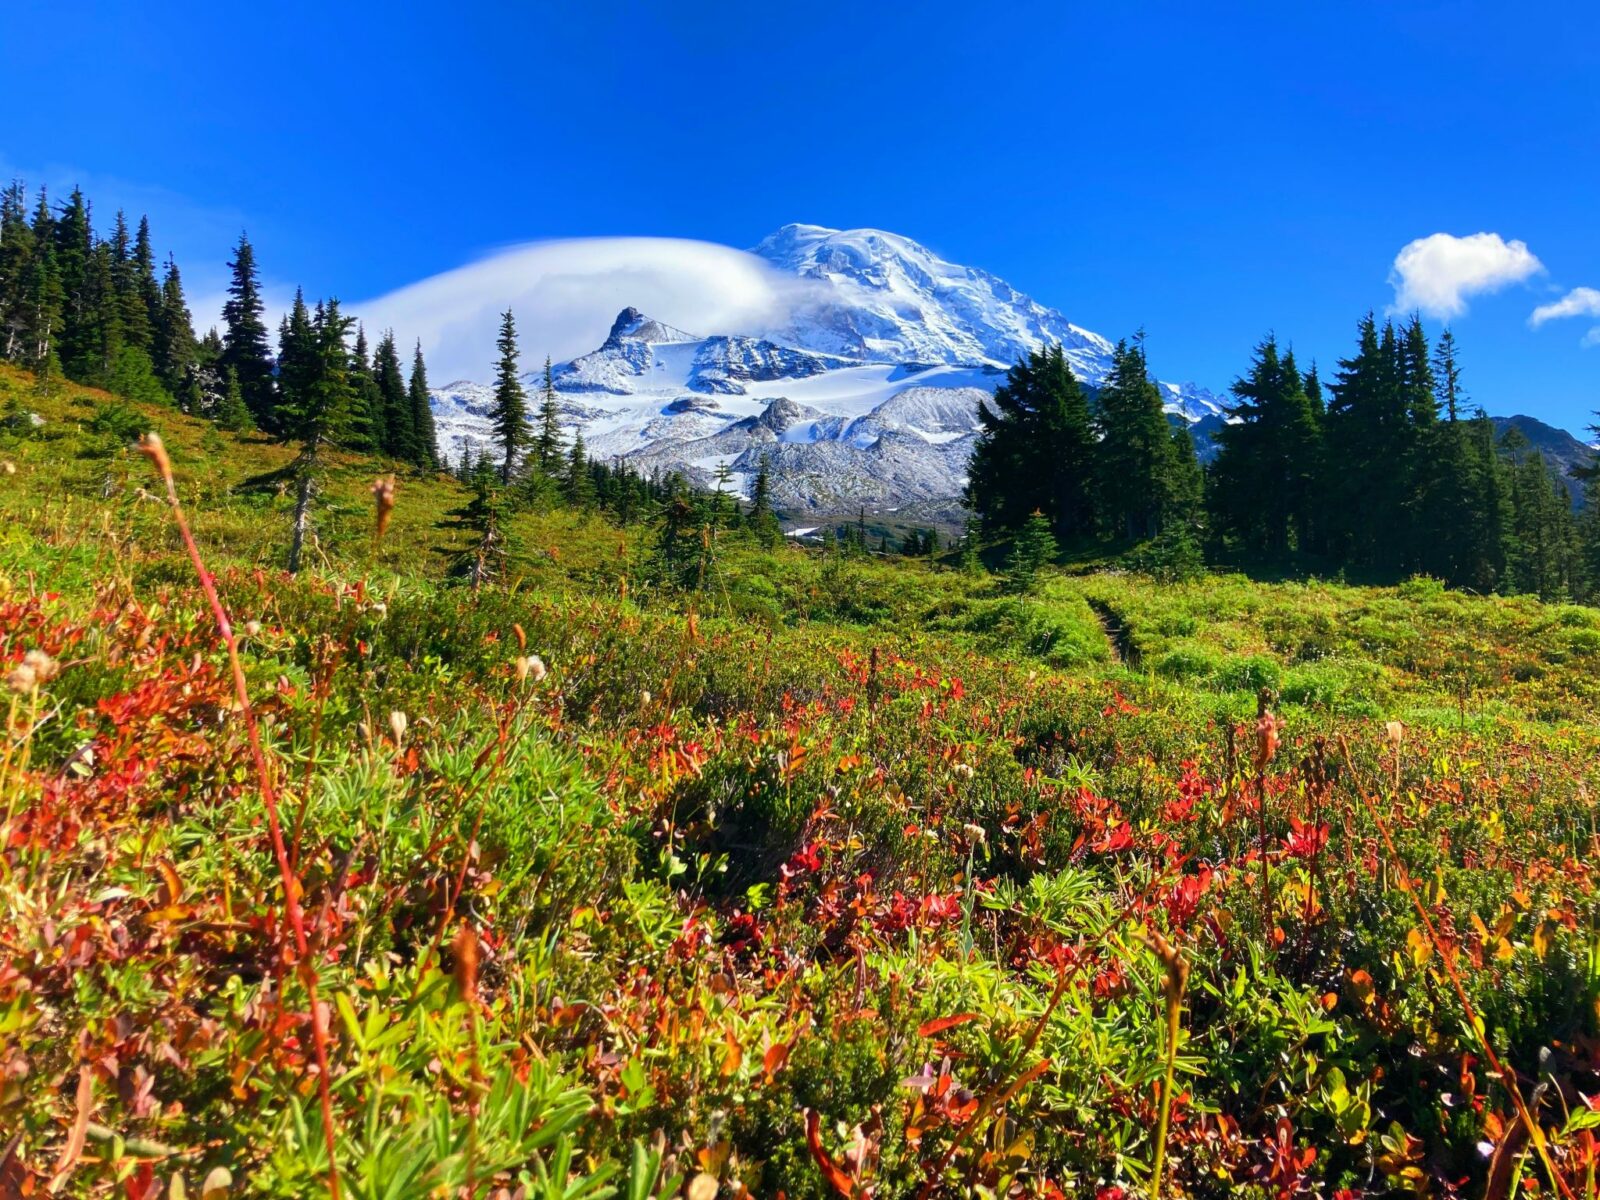 Mt Rainier, a high snow capped mountain, rises above a meadow in Spray Park. There are evergreen trees in the distance and in the foreground along with green plants there are berry bushes turning bright red for fall.